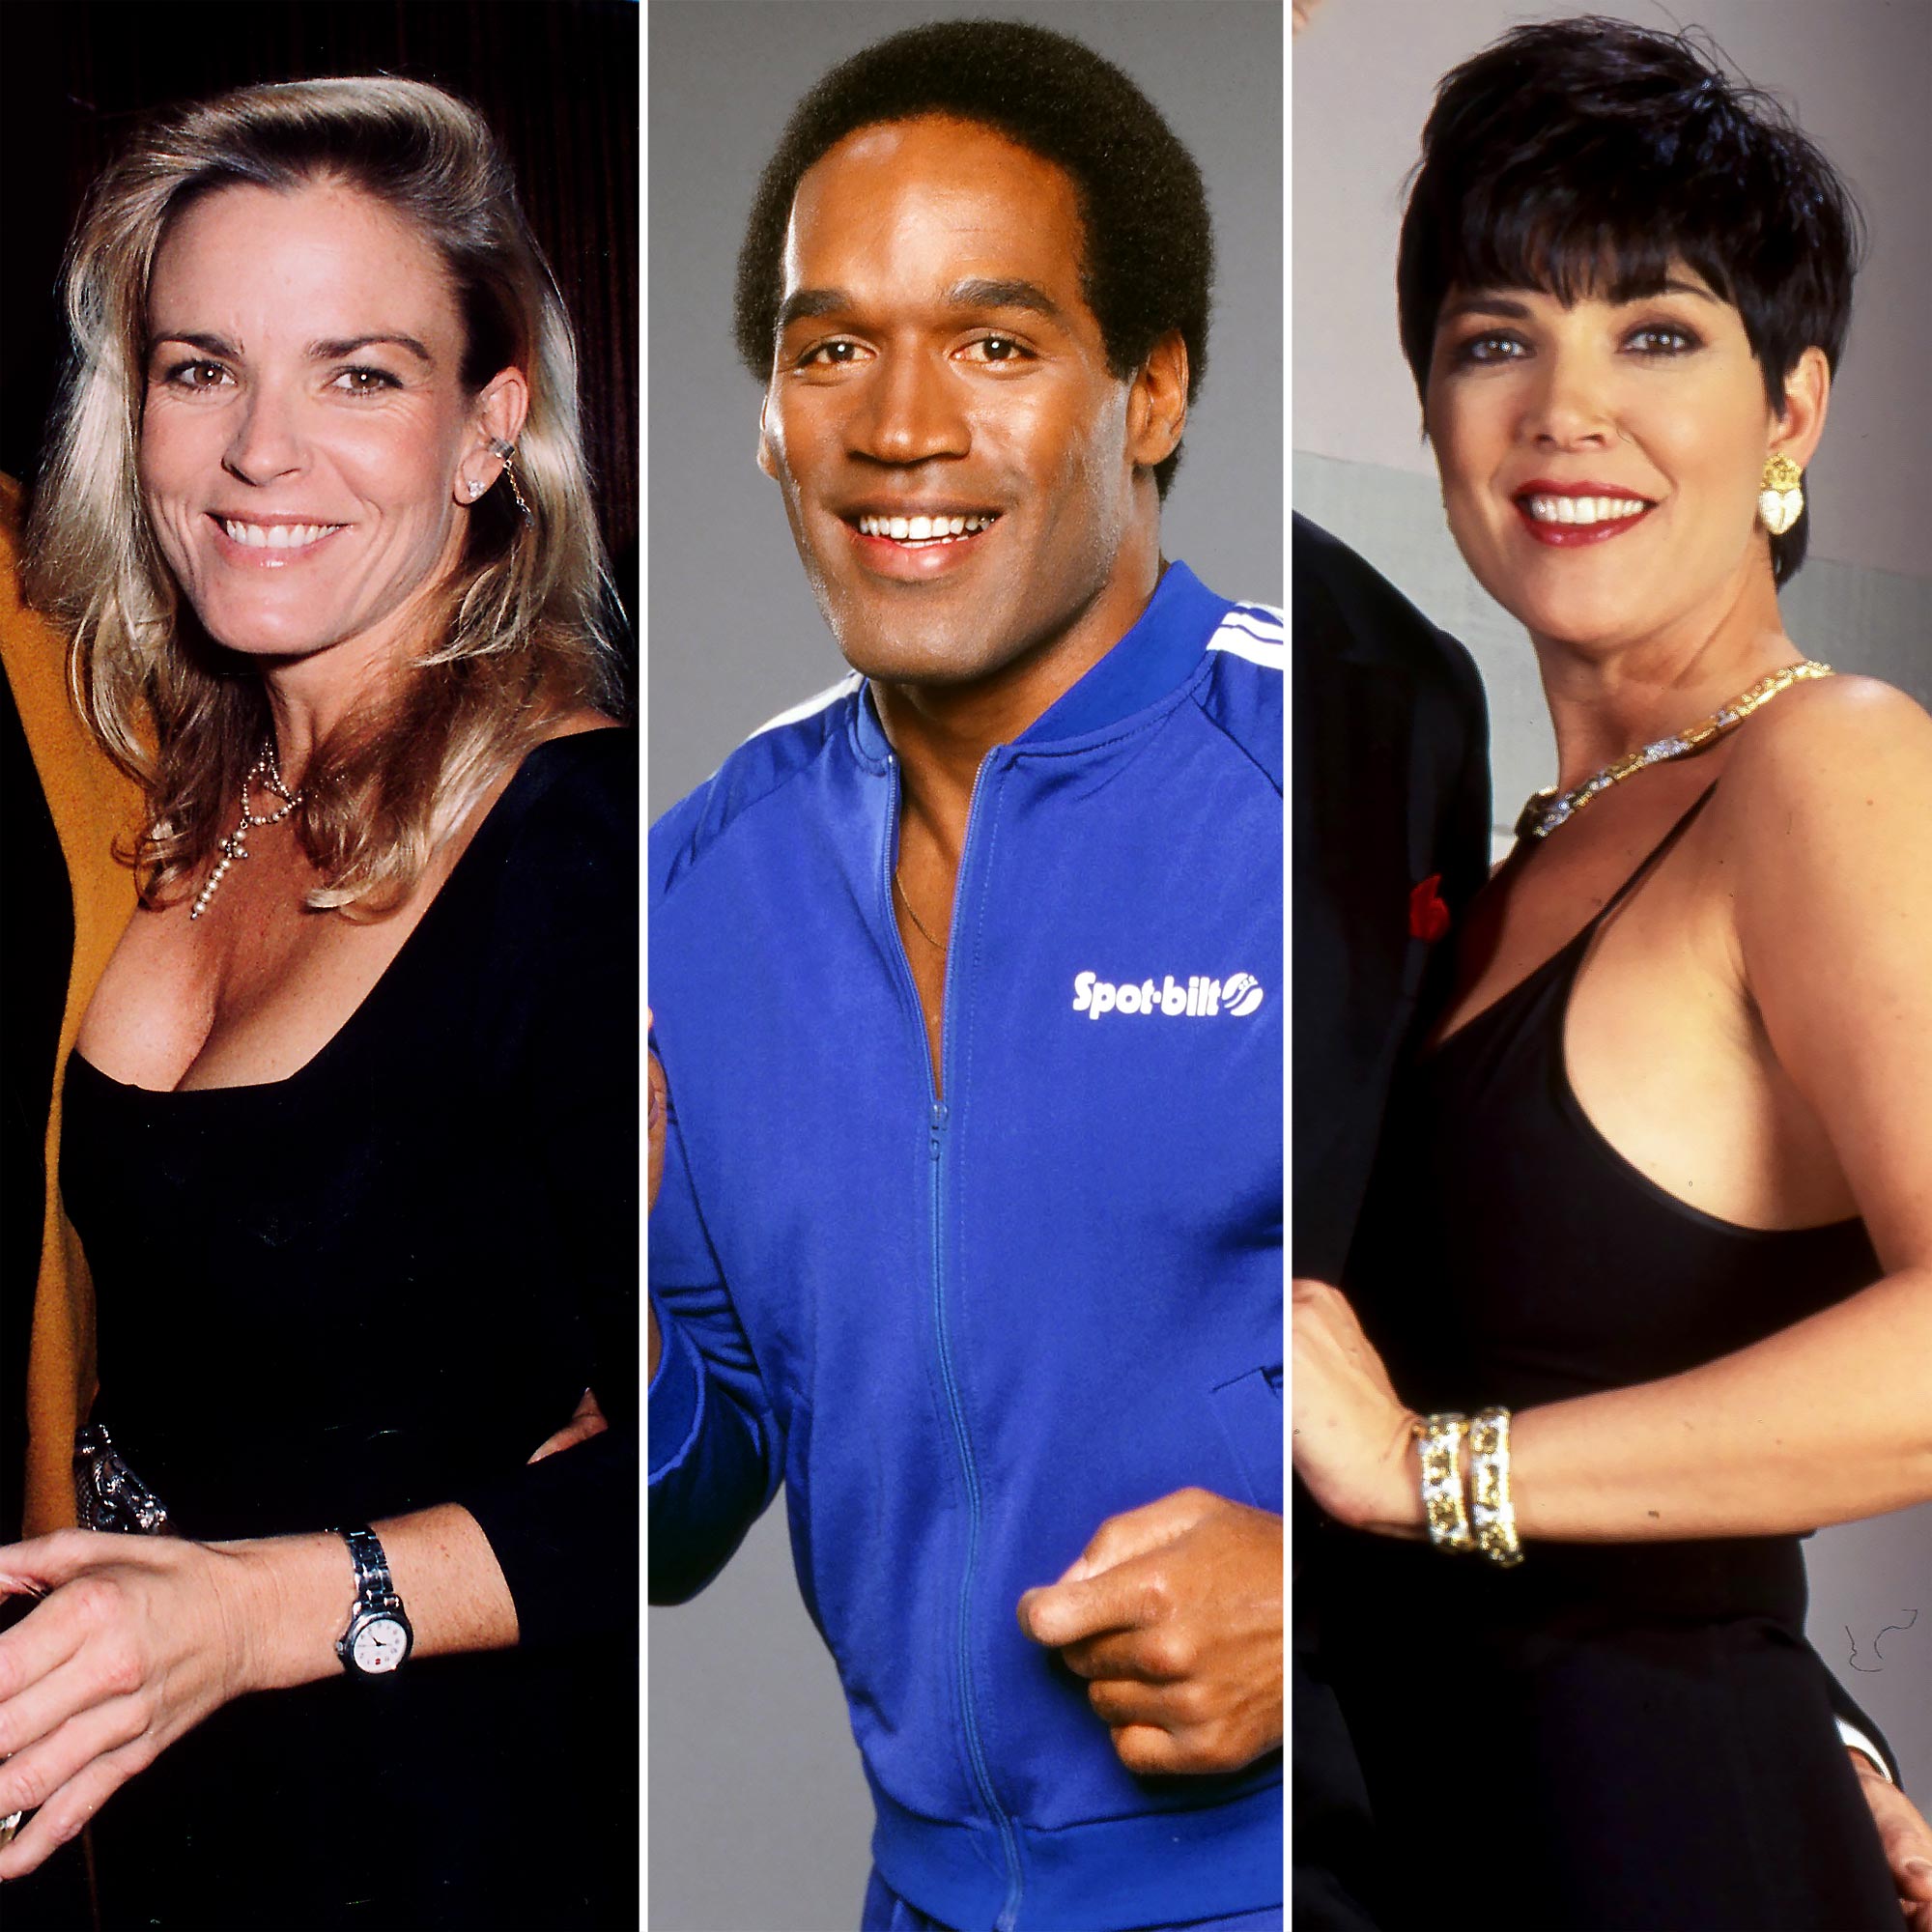 Nicole Brown Simpson Docuseries: Revelations From Kris Jenner and More